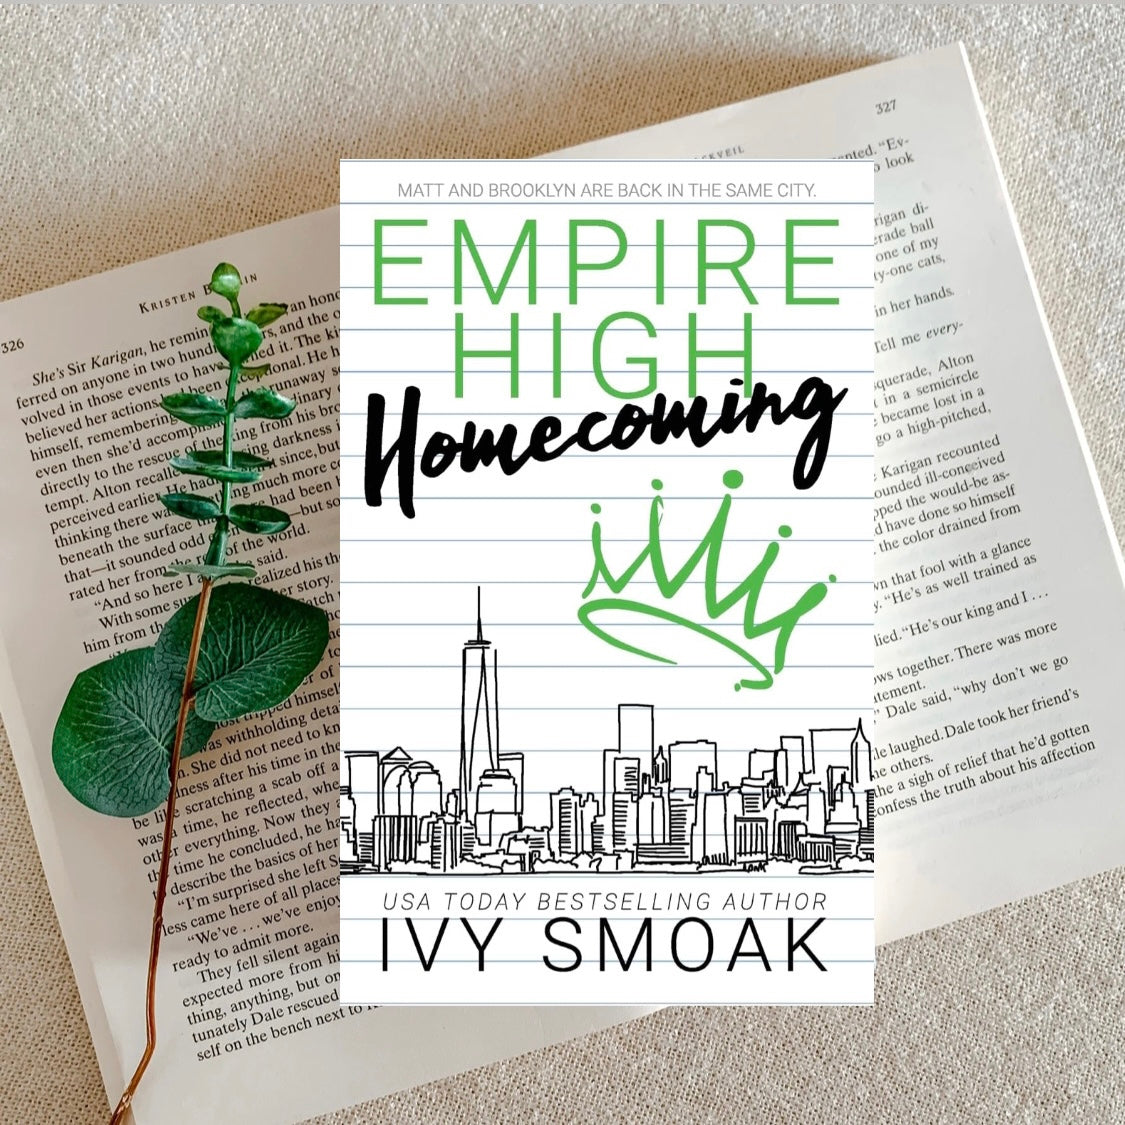 Empire High Series by Ivy Smoak